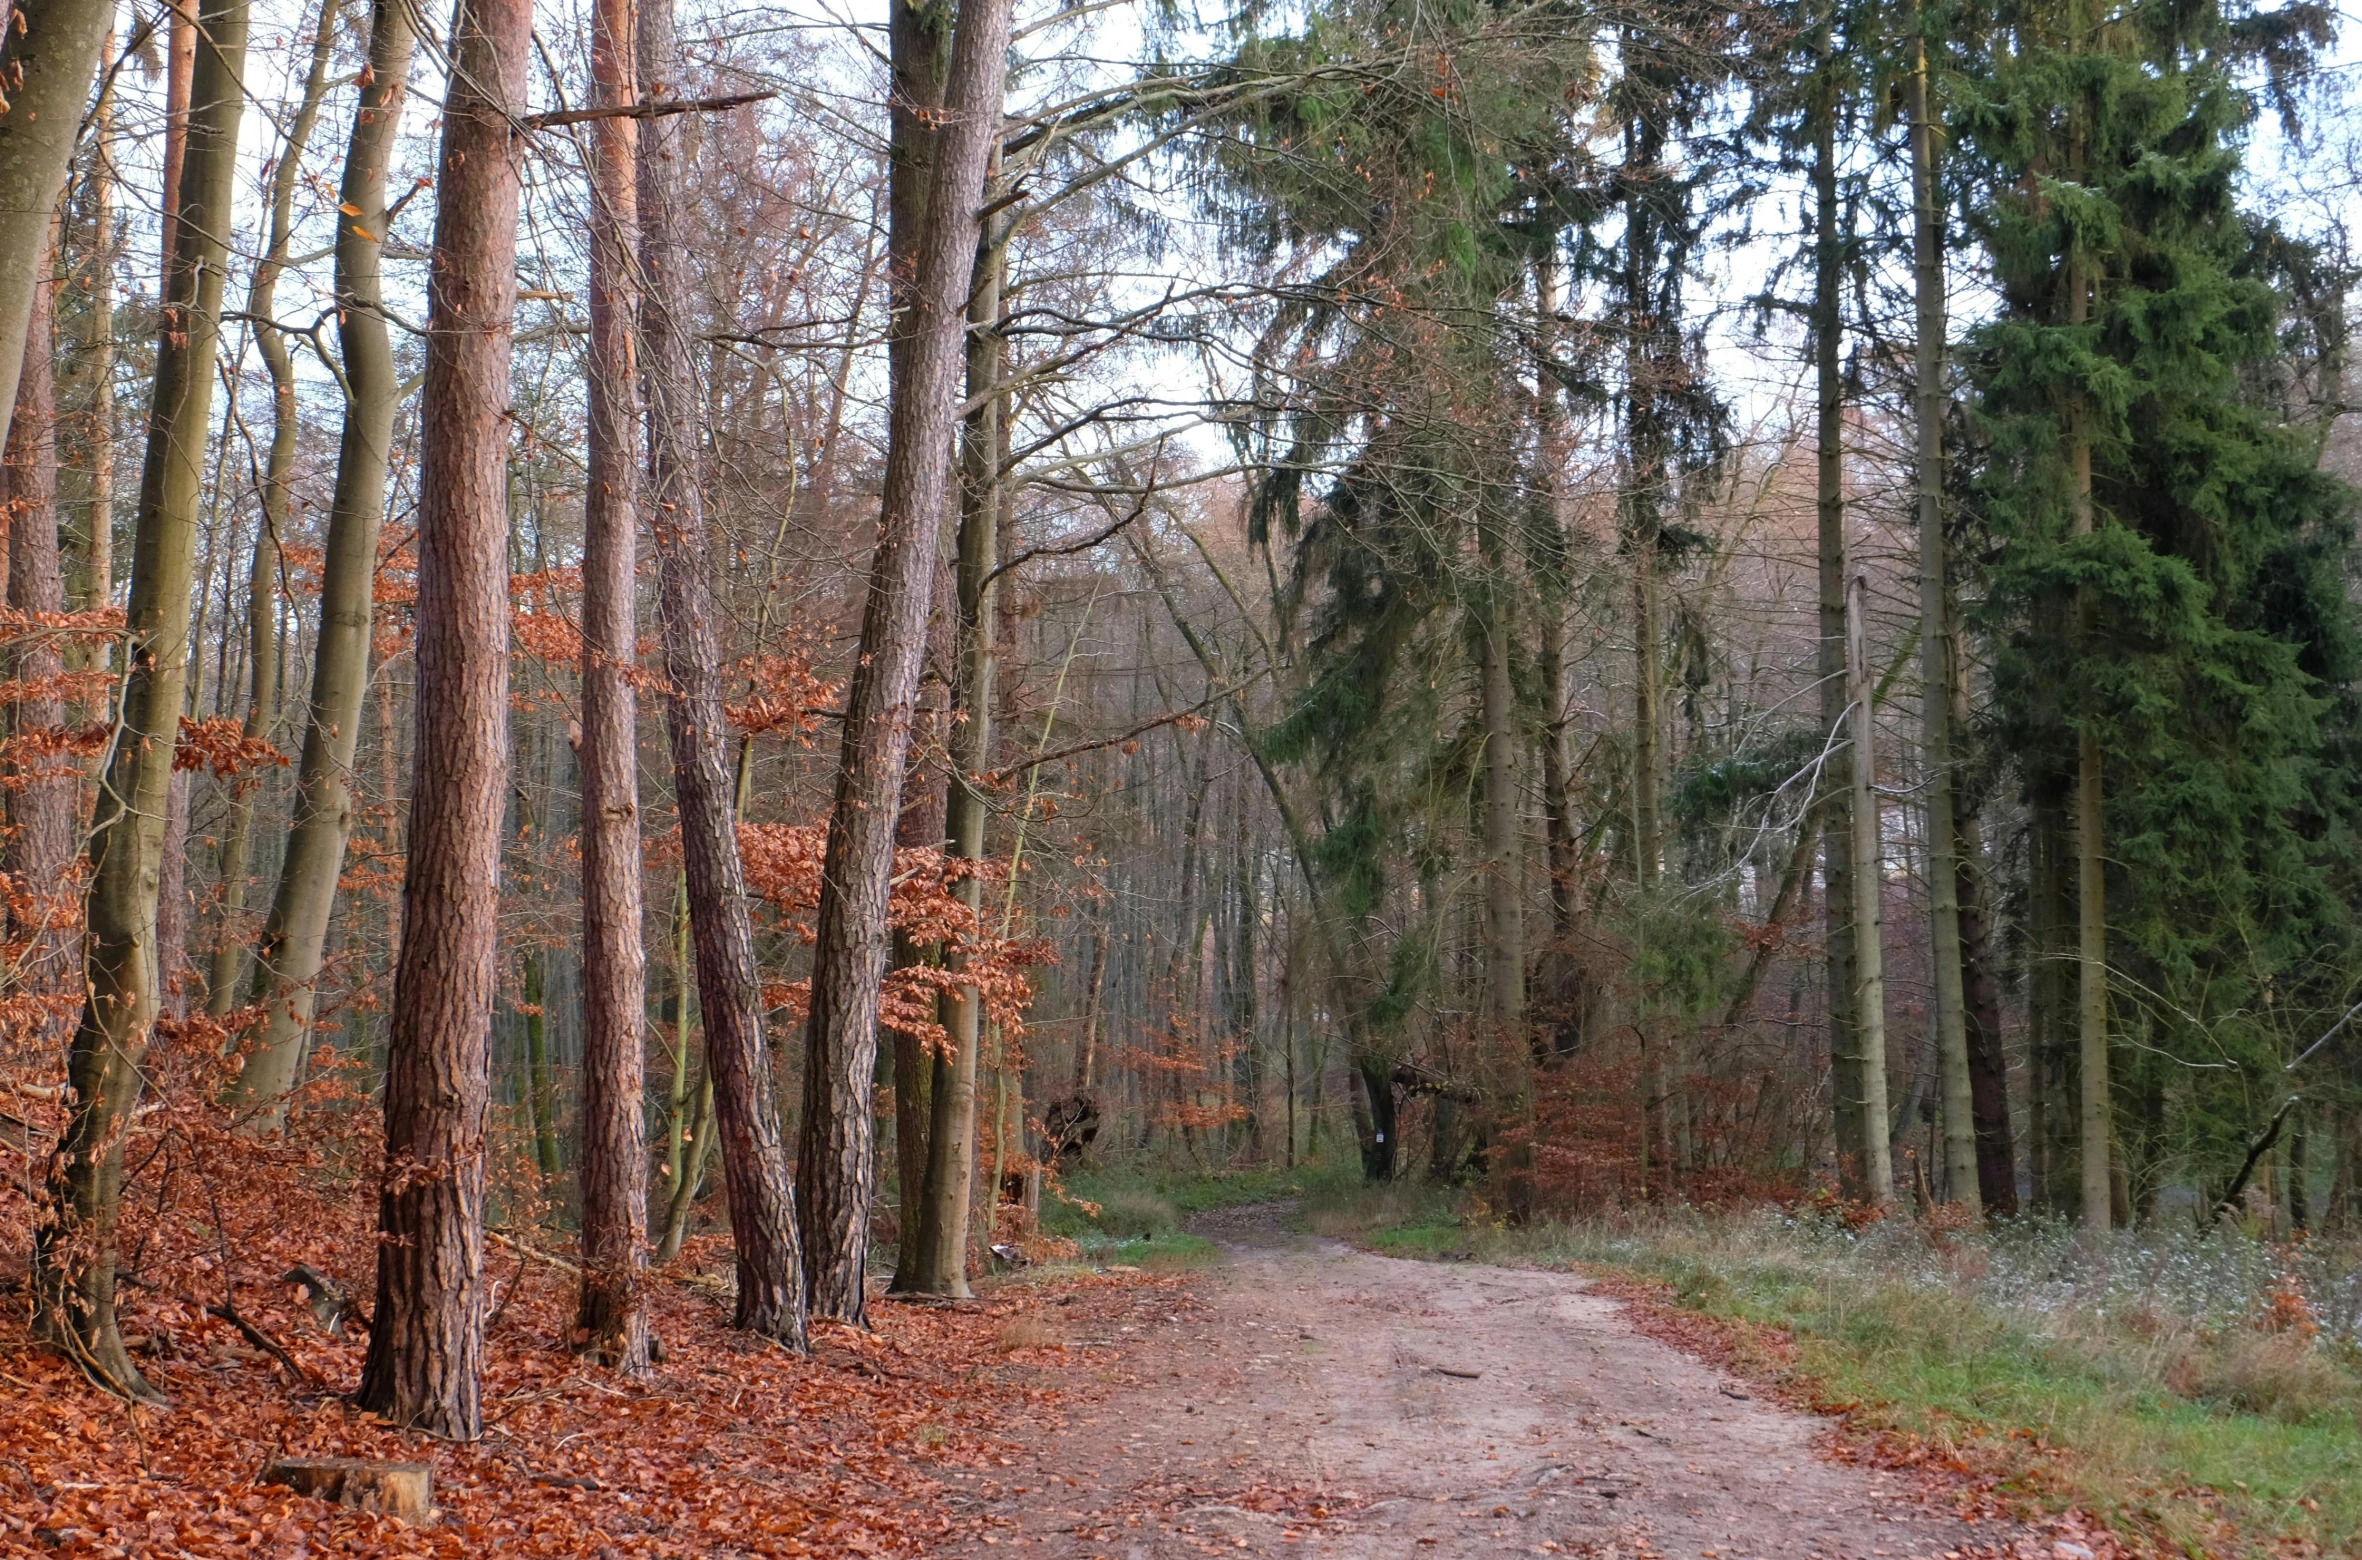 a dirt road is surrounded by trees and foliage